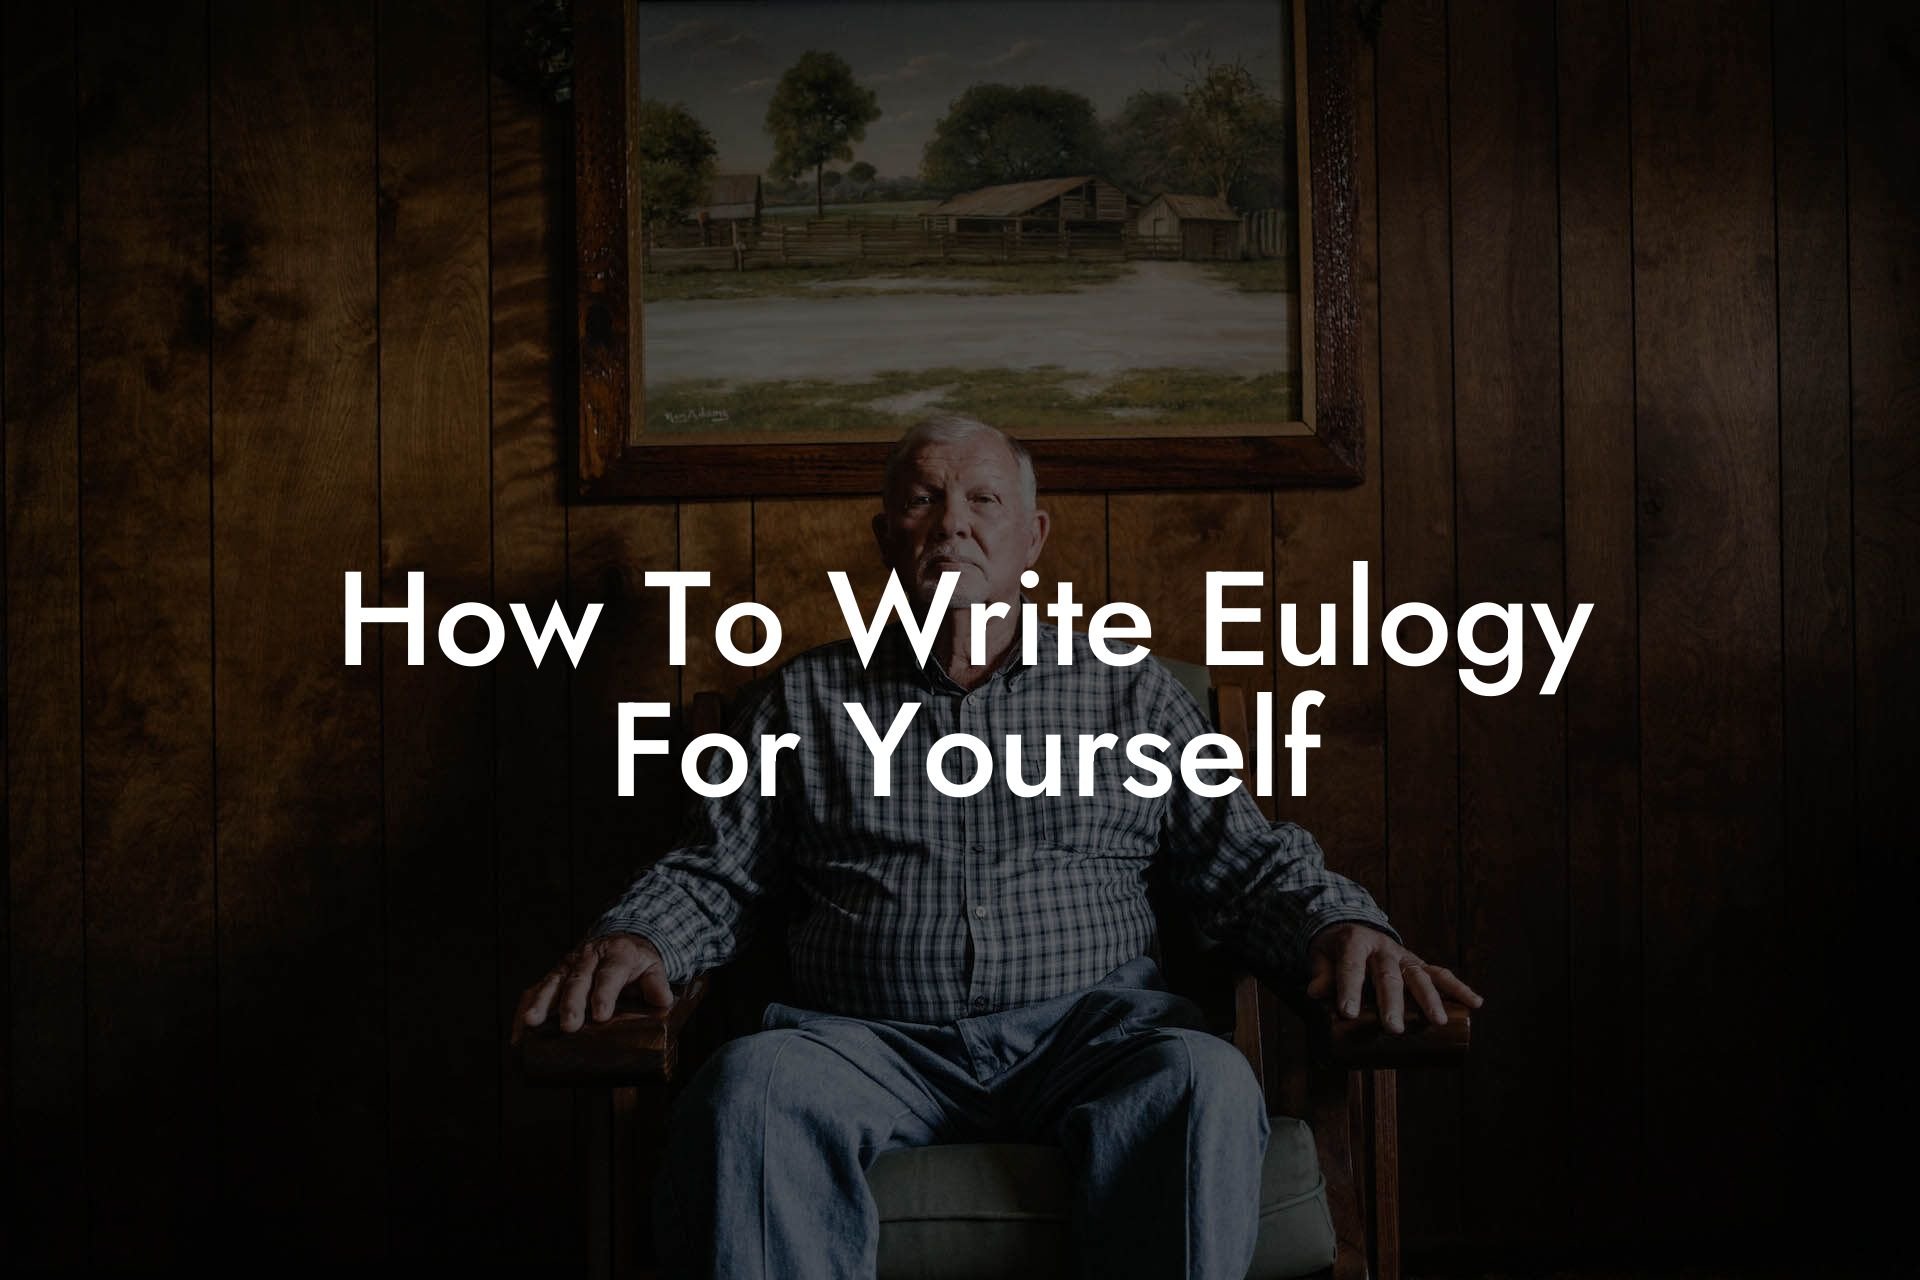 How To Write Eulogy For Yourself